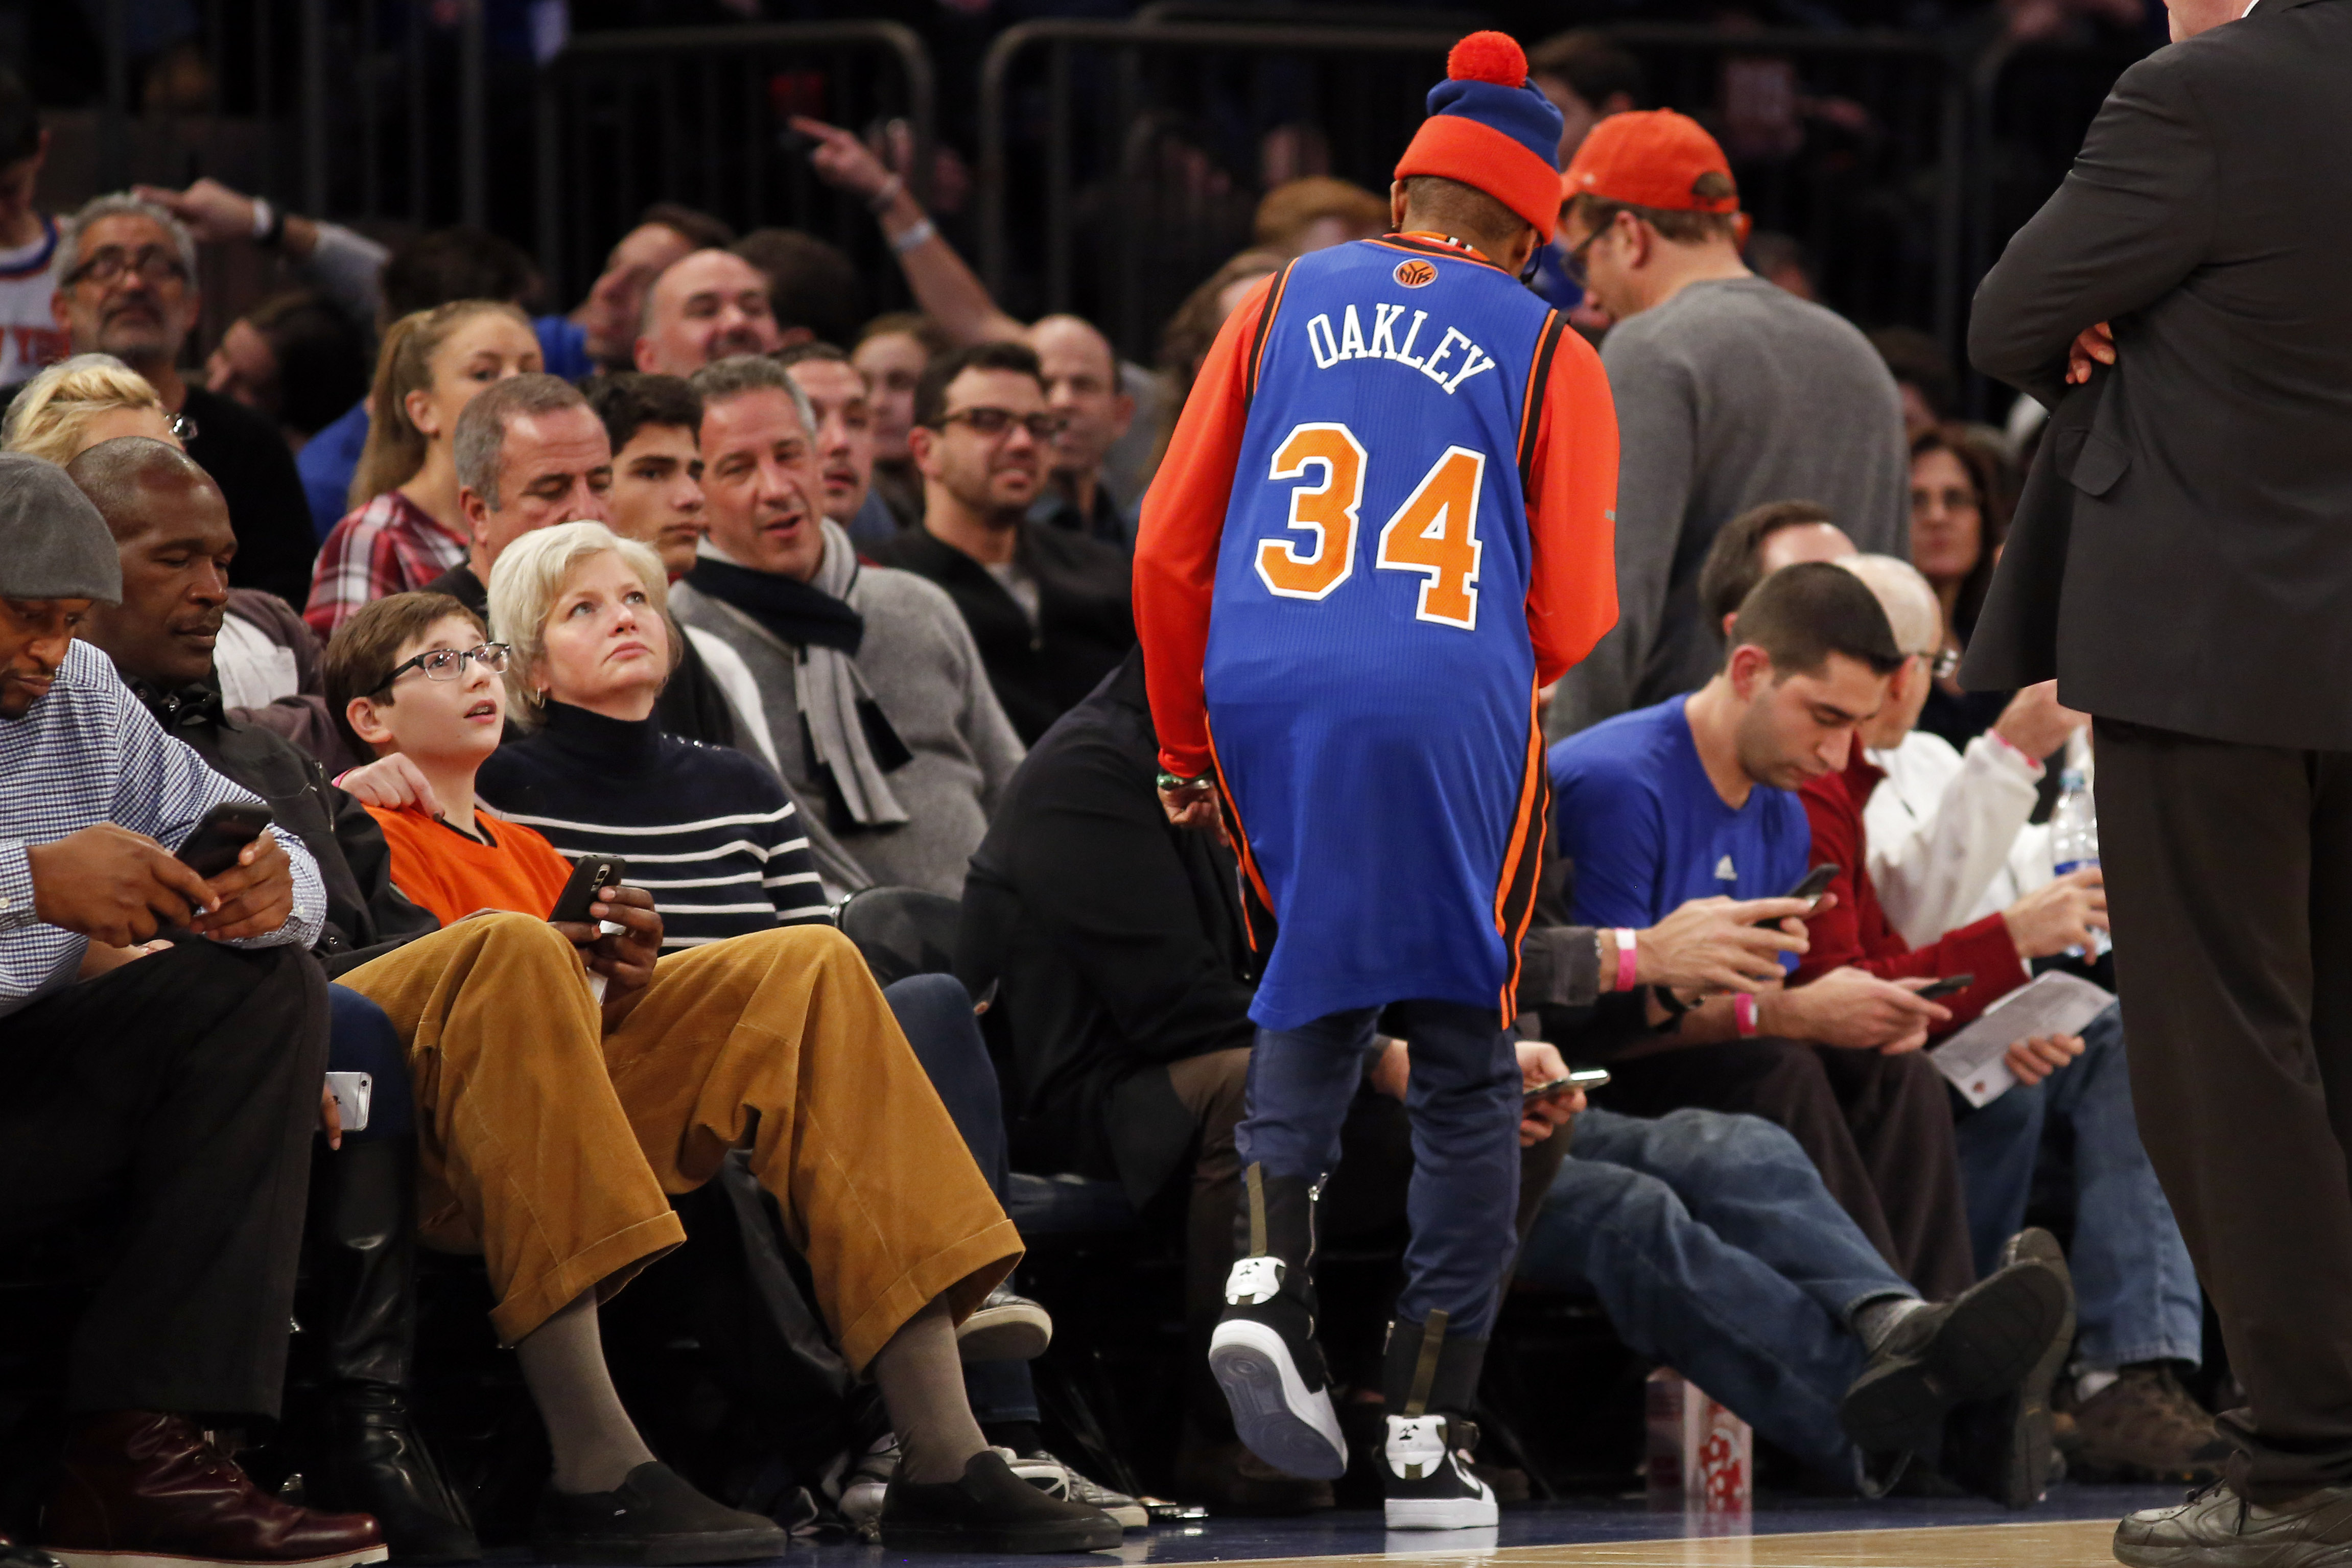 Spike Lee showed up at the Knicks game proudly sporting a Charles